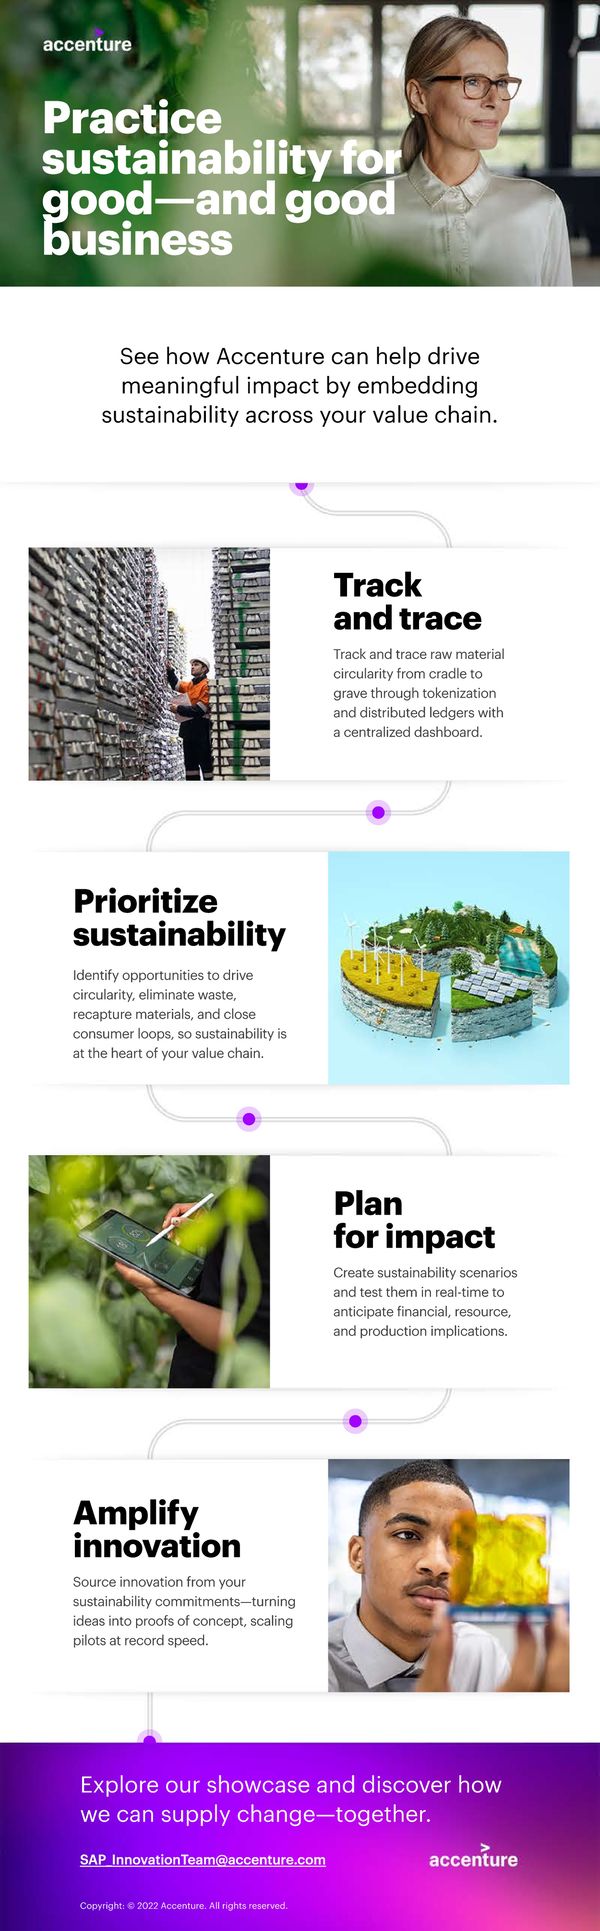 Signals of Change Infographic: Practice sustainability for good-and good business - Page 1